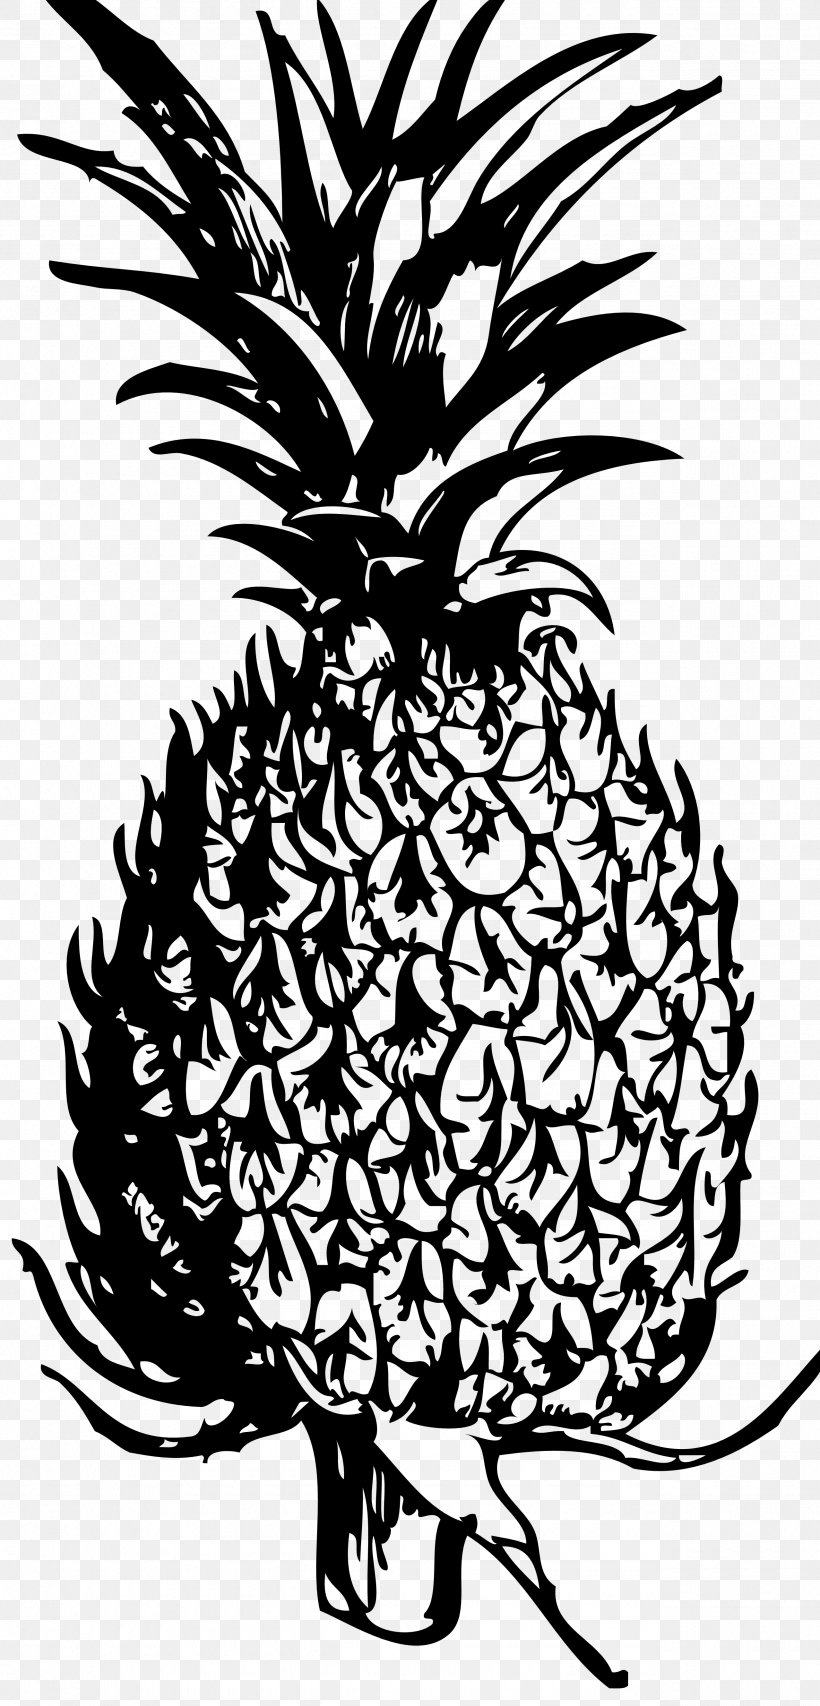 Pineapple Black And White Clip Art, PNG, 2555x5317px, Pineapple, Arecales, Artwork, Black, Black And White Download Free